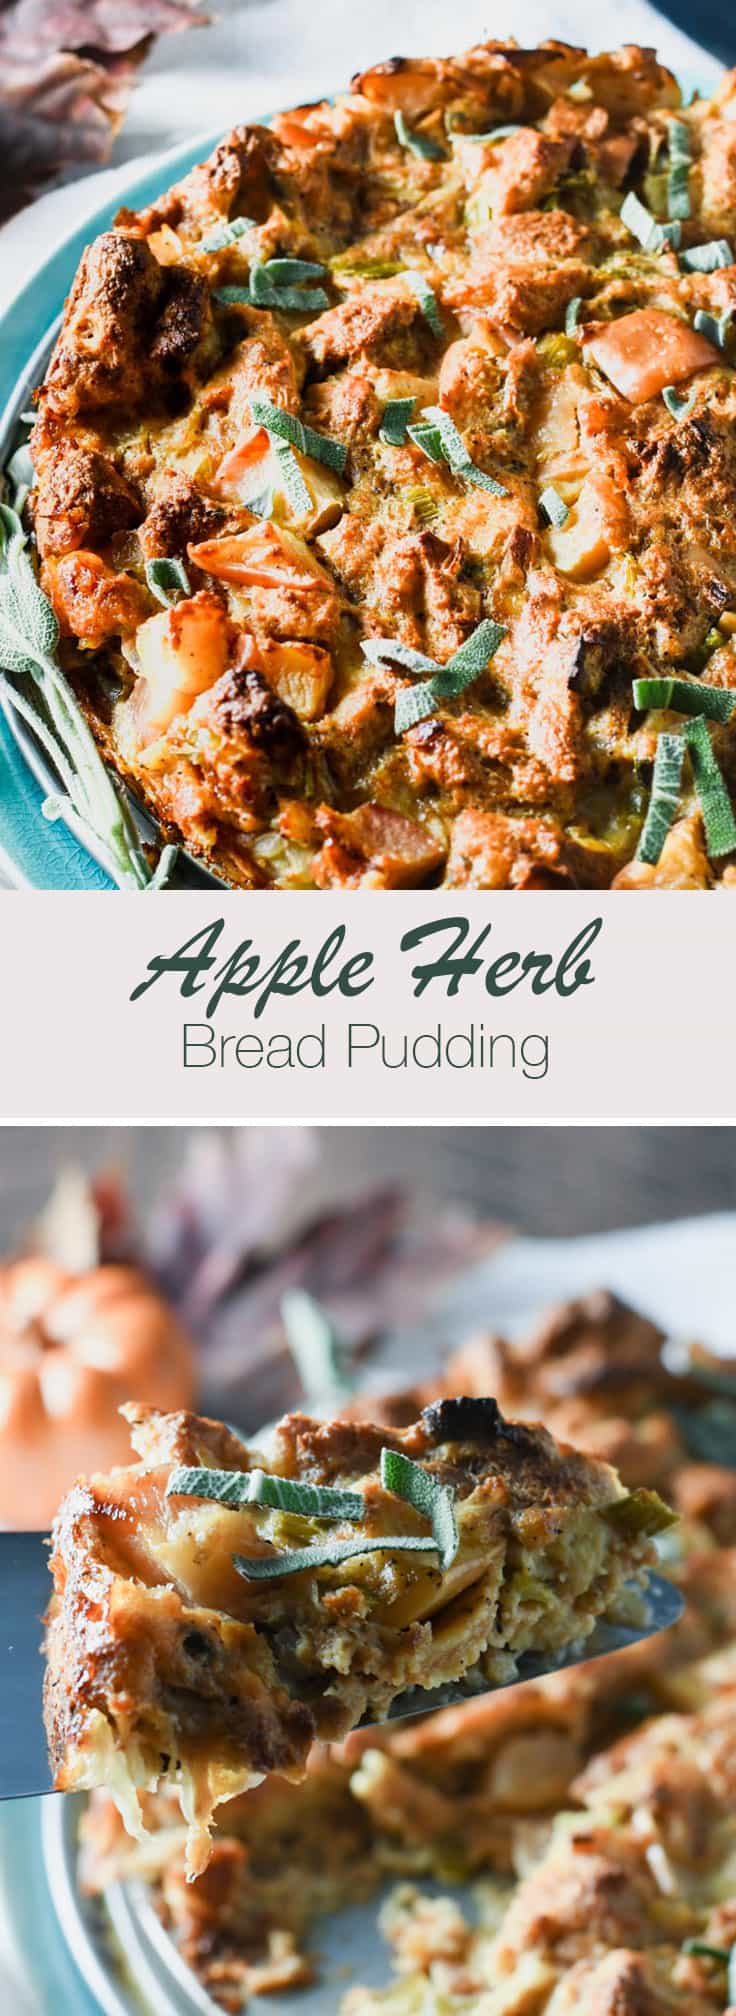 This tasty savory bread pudding makes the perfect addition to a Thanksgiving Dinner or other fall holiday celebration! Perfect side dish recipe on AllSheCooks.com. #Thanksgiving #SideDish #breadpudding #Savory